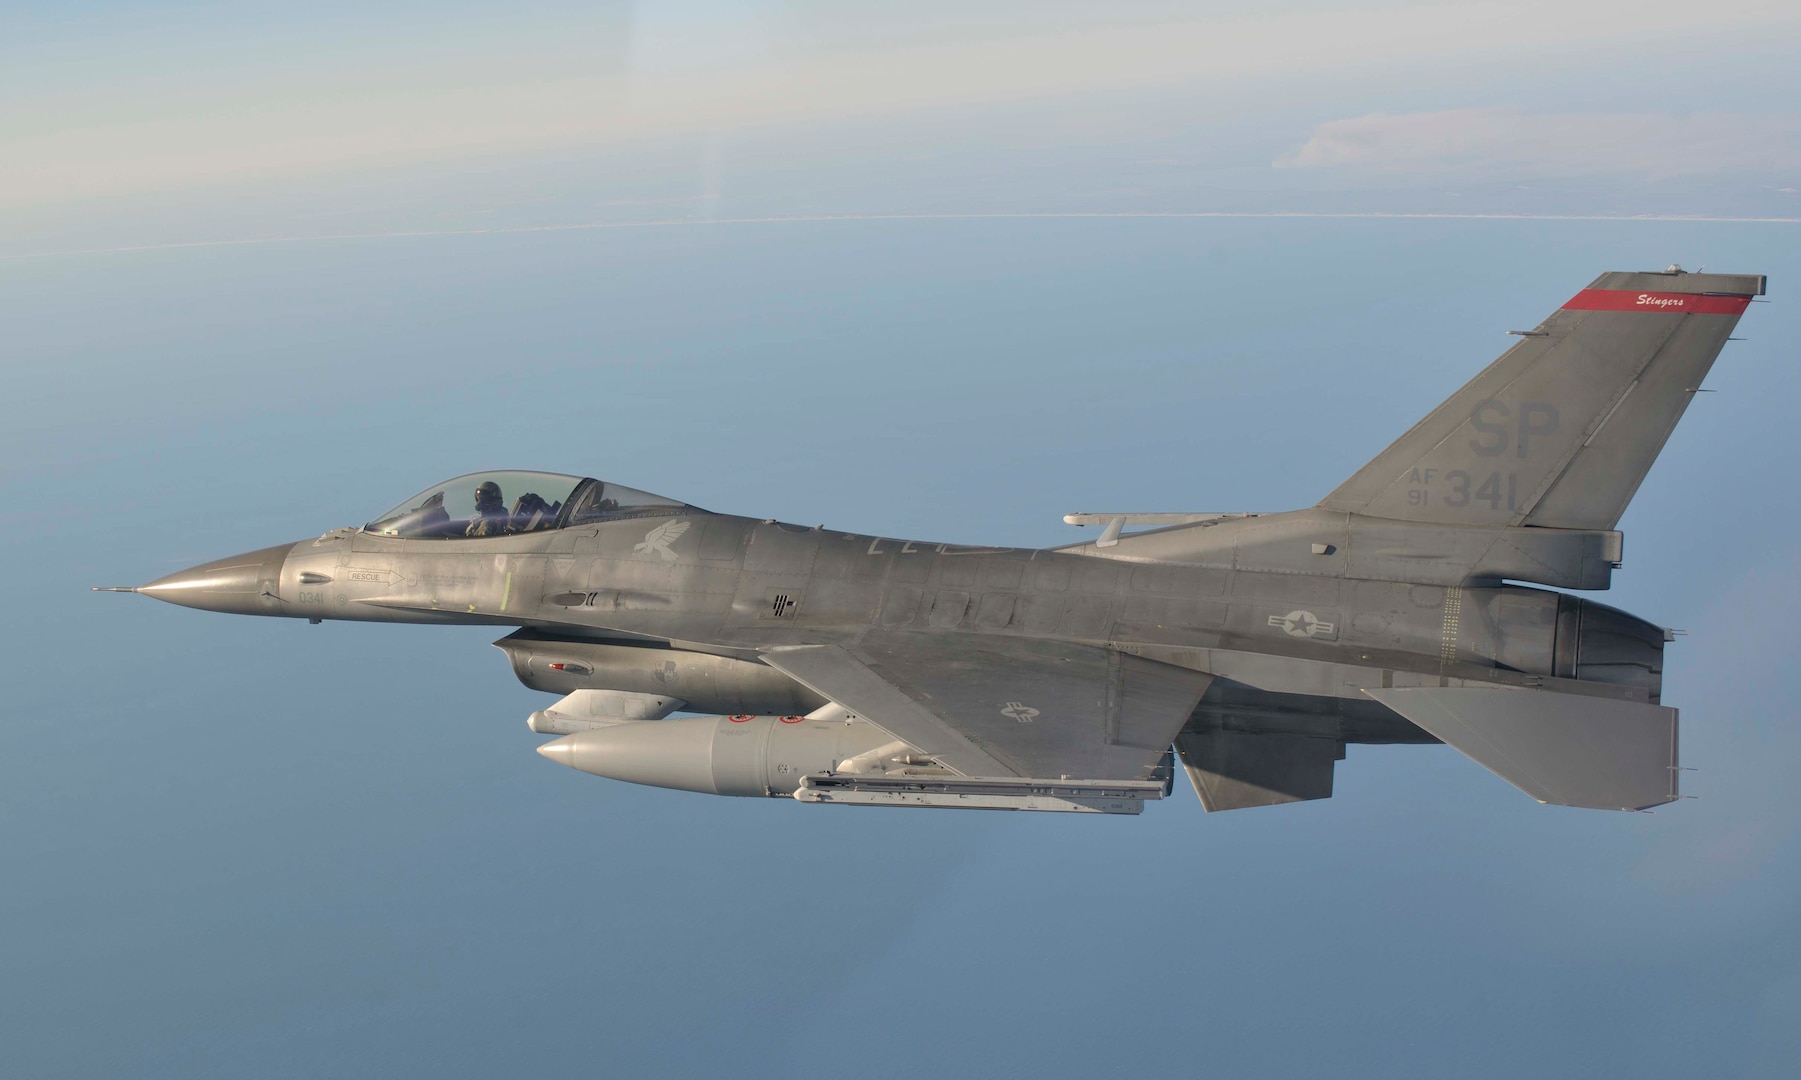 OVER THE GULF OF MEXICO - An F-16 from the 179th Fighter Squadron, a subordinate unit of the 148th Fighter Wing out of Duluth, Minn., flies a mission over the Gulf of Mexico Jan. 27. The 148th FW is working with the 53rd Weapons Evaluation Group at Tyndall Air Force Base, Fla., for two weeks to train for their Air Sovereignty Alert missions and to validate their new Block 50 F-16s. 

(U.S. Air Force photo by 1st Lt. Christopher Hoskins) 

